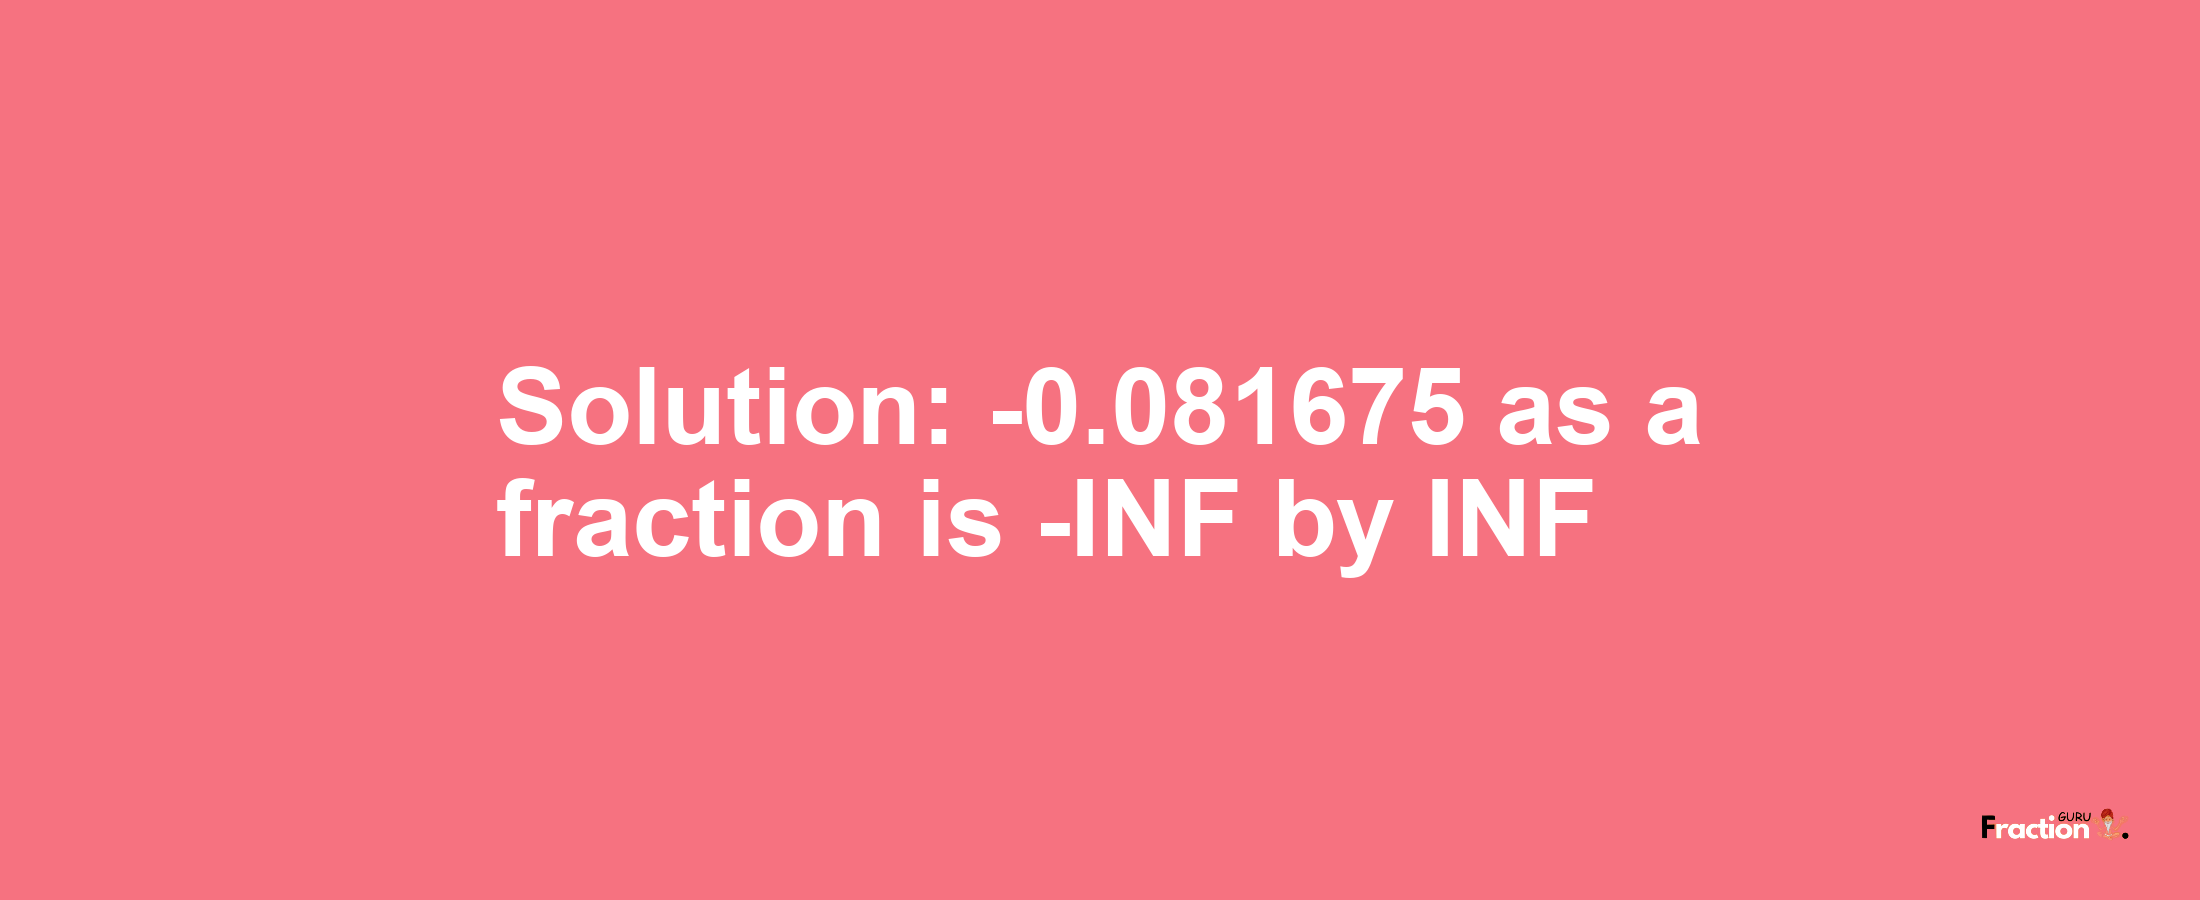 Solution:-0.081675 as a fraction is -INF/INF